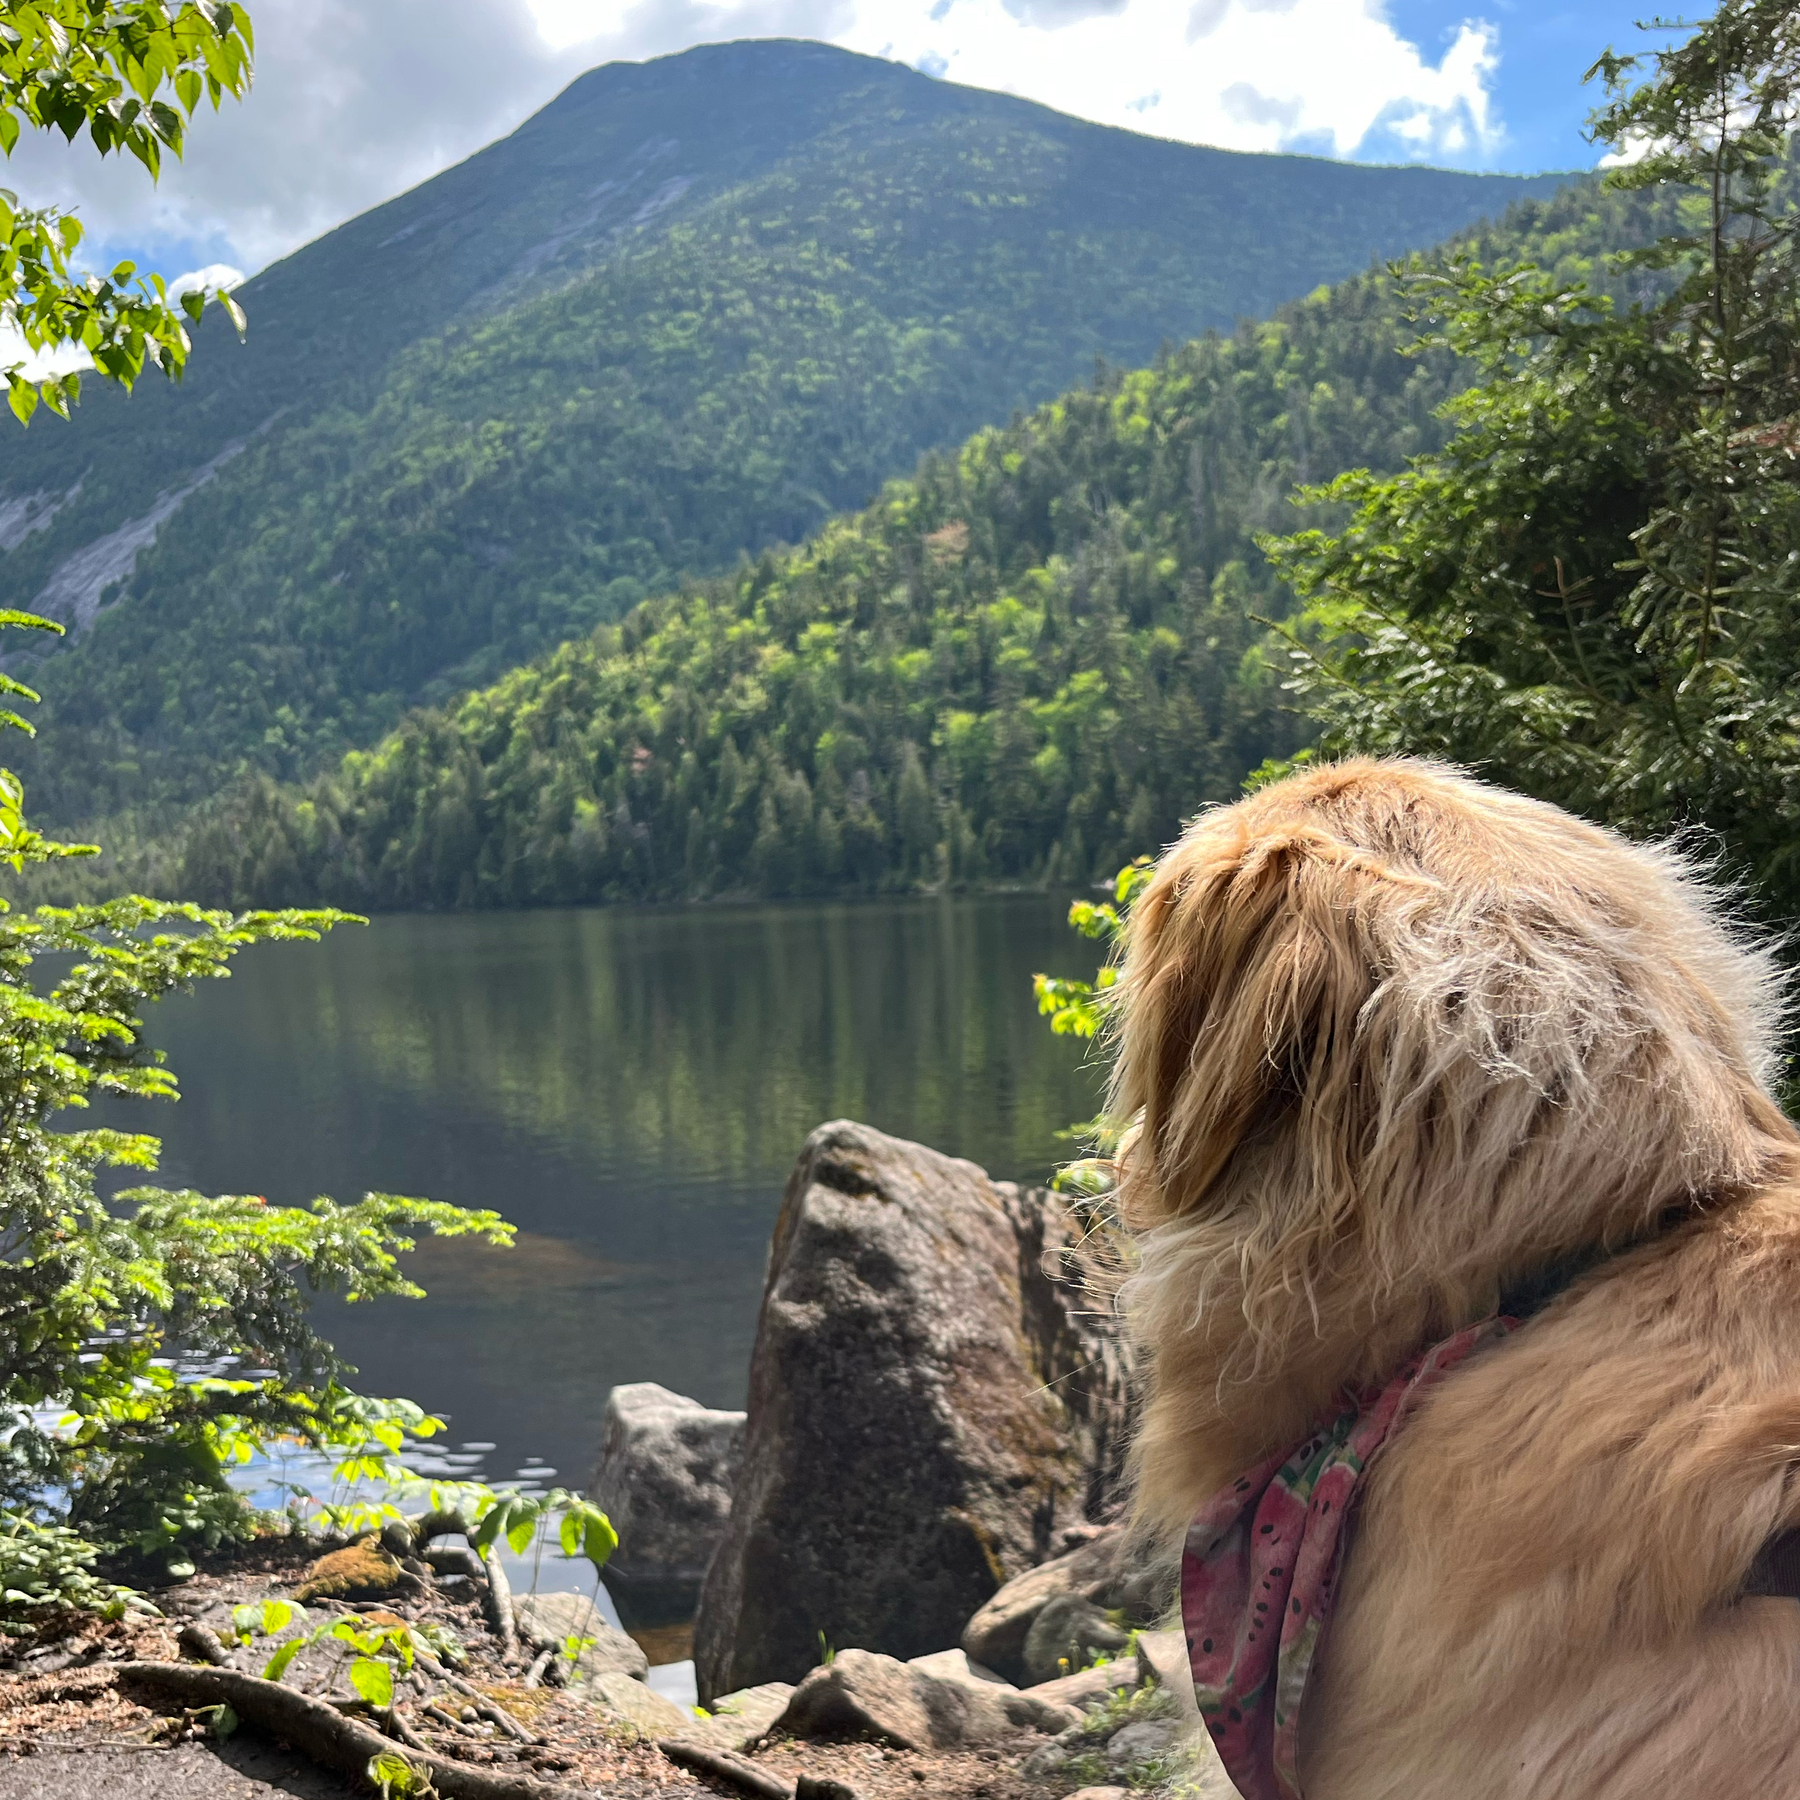 A mountain reflected in a lake at its base, with a dog in the foreground looking at it.